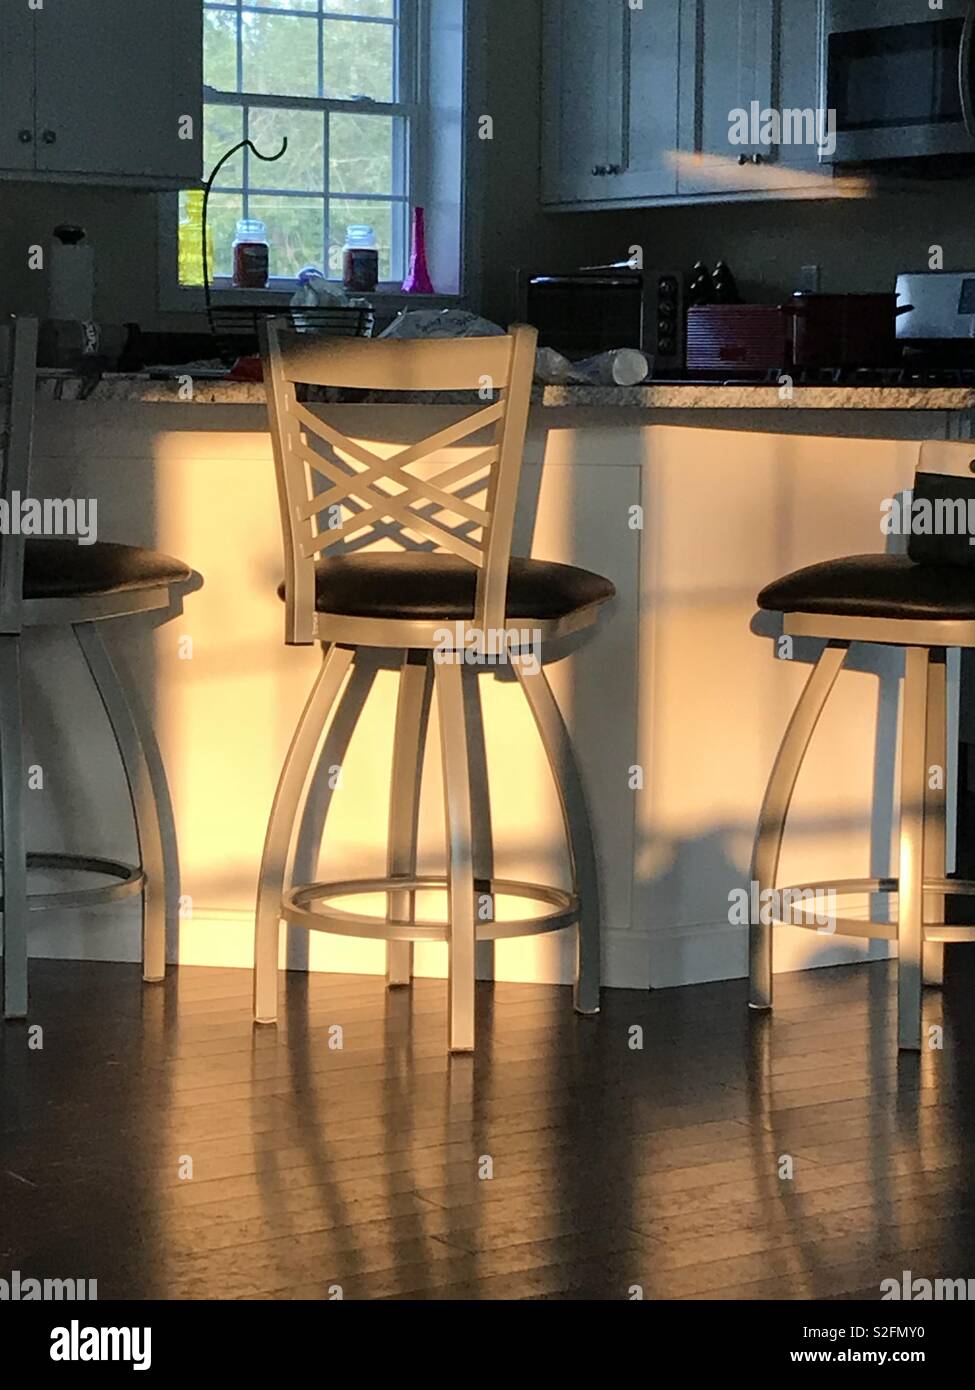 Sunlight and kitchen chairs. Stock Photo